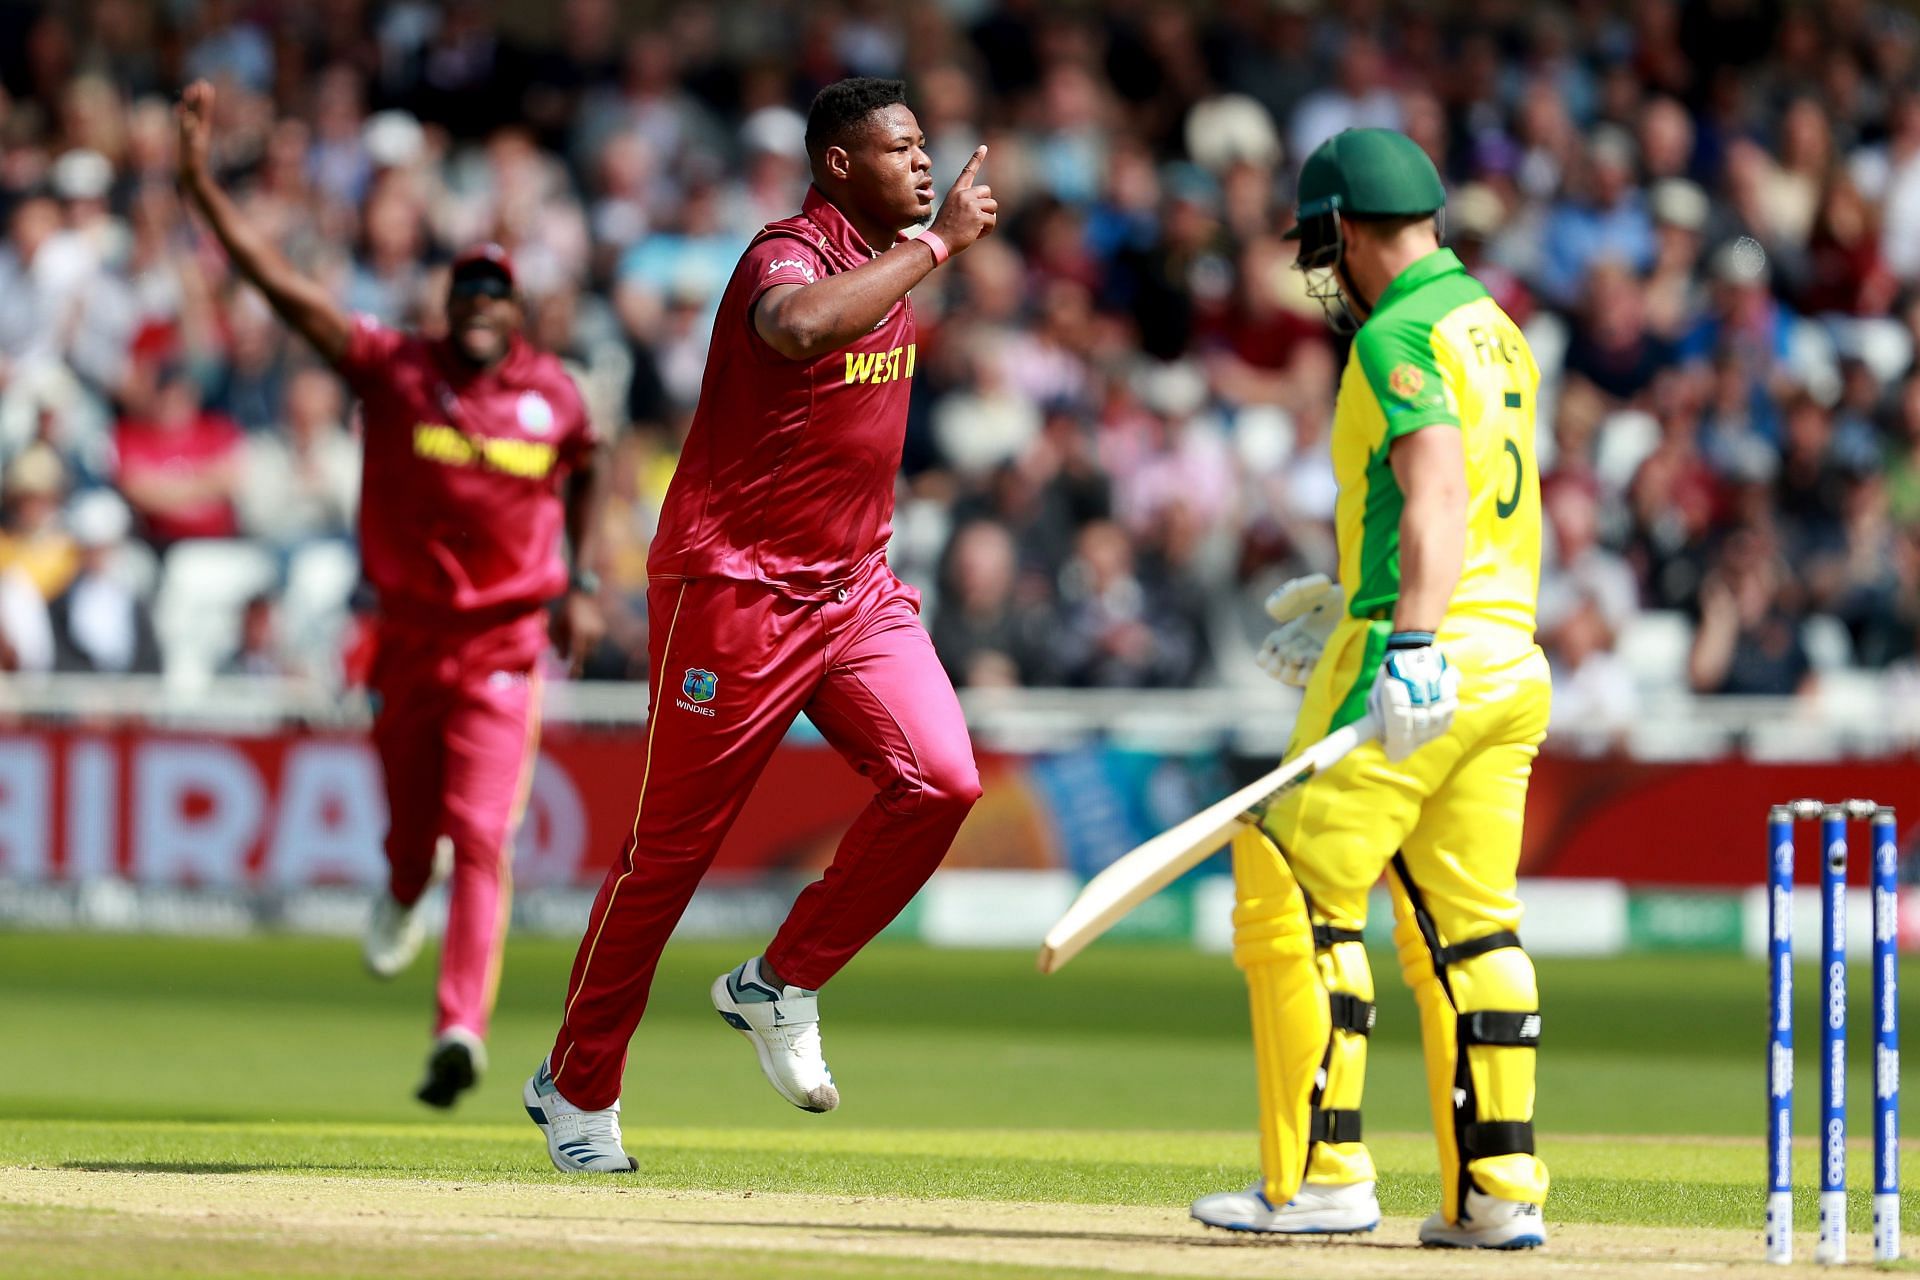 Can West Indies end their T20 World Cup 2021 campaign on a winning note?